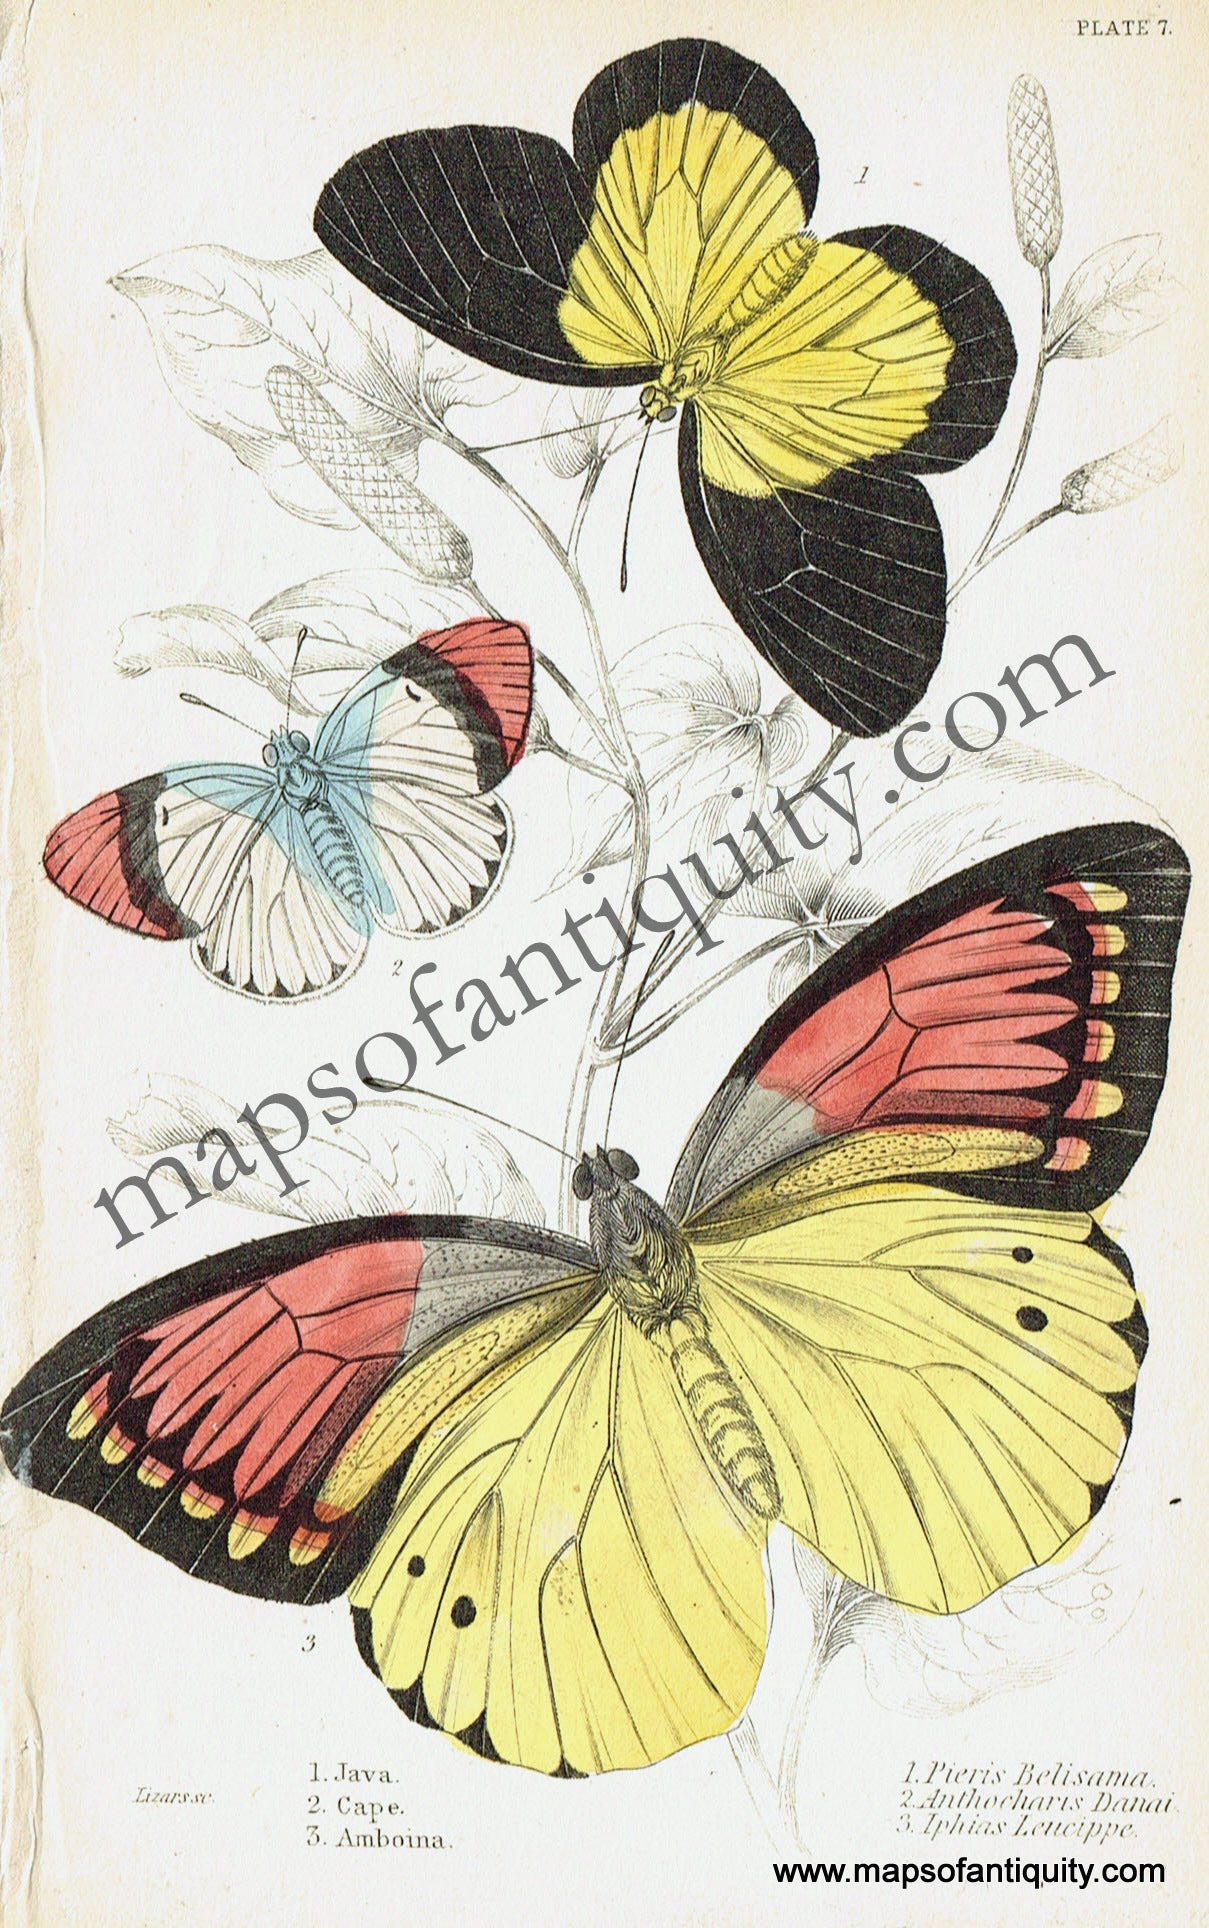 Antique-Hand-Colored-Print-Pieris-belisama-Anthocharis-danai-and-Iphias-leucippe-Antique-Prints-Natural-History-Insects-1840-Duncan-Maps-Of-Antiquity